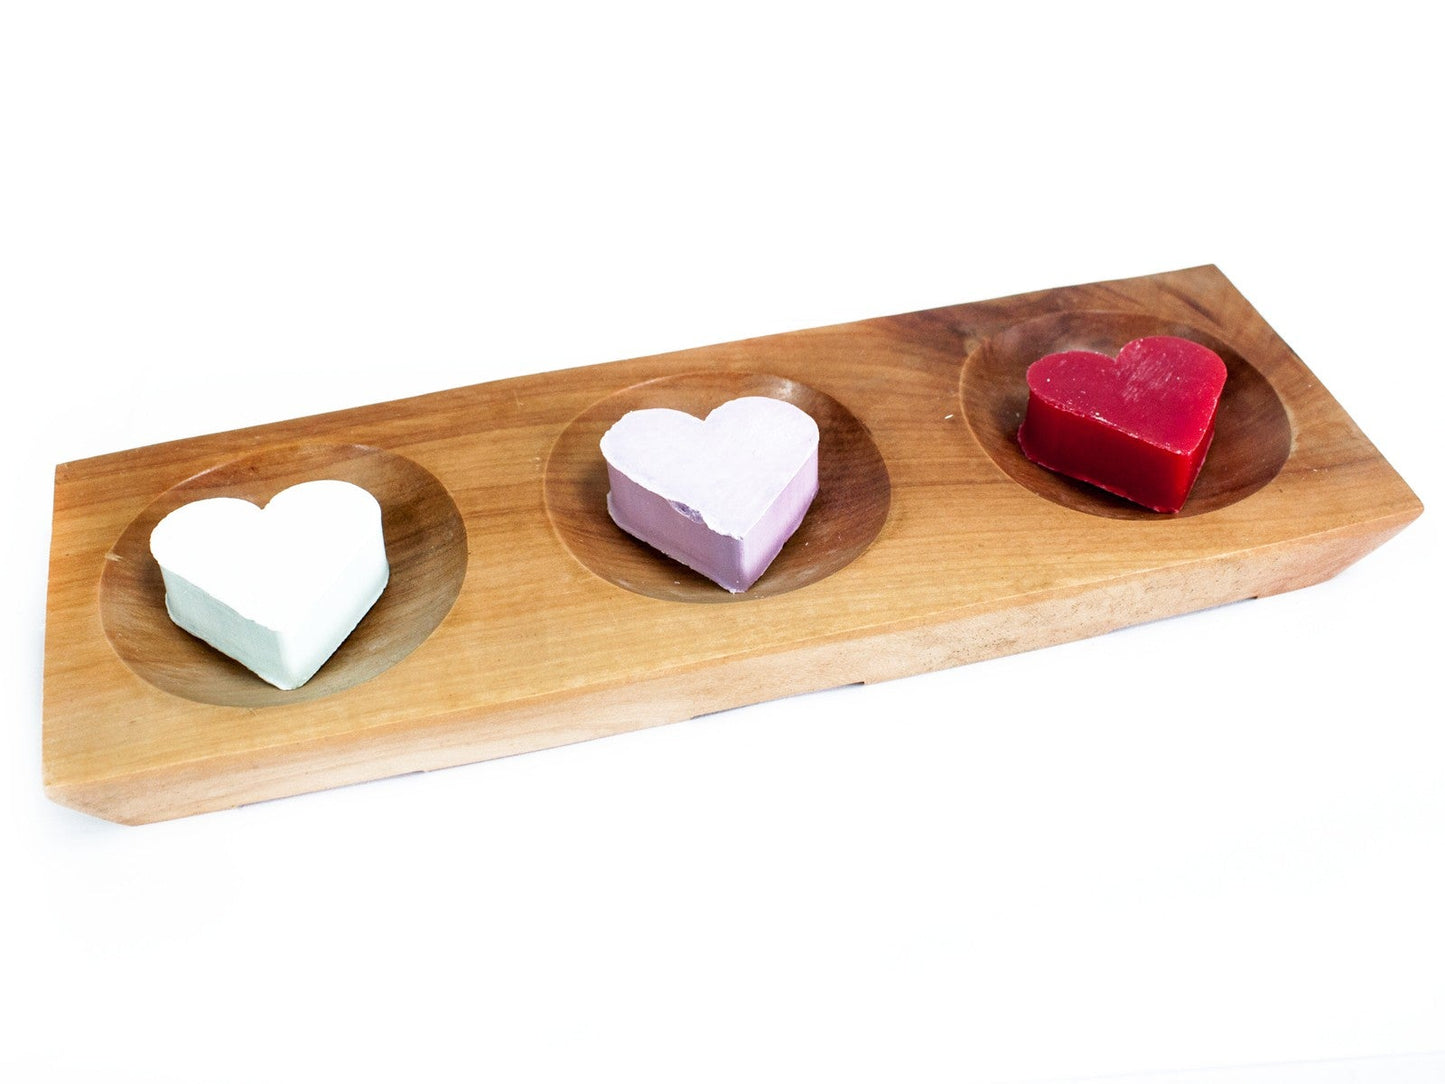 Wooden bath bomb holder on a white background. The bath bomb holder has three heart shaped  small soaps in it, one soap in slightly dipped bay which is there to hold the bath bombs or soaps. The soaps in the wooden bath bomb holder from left to right are white, light pink and red,